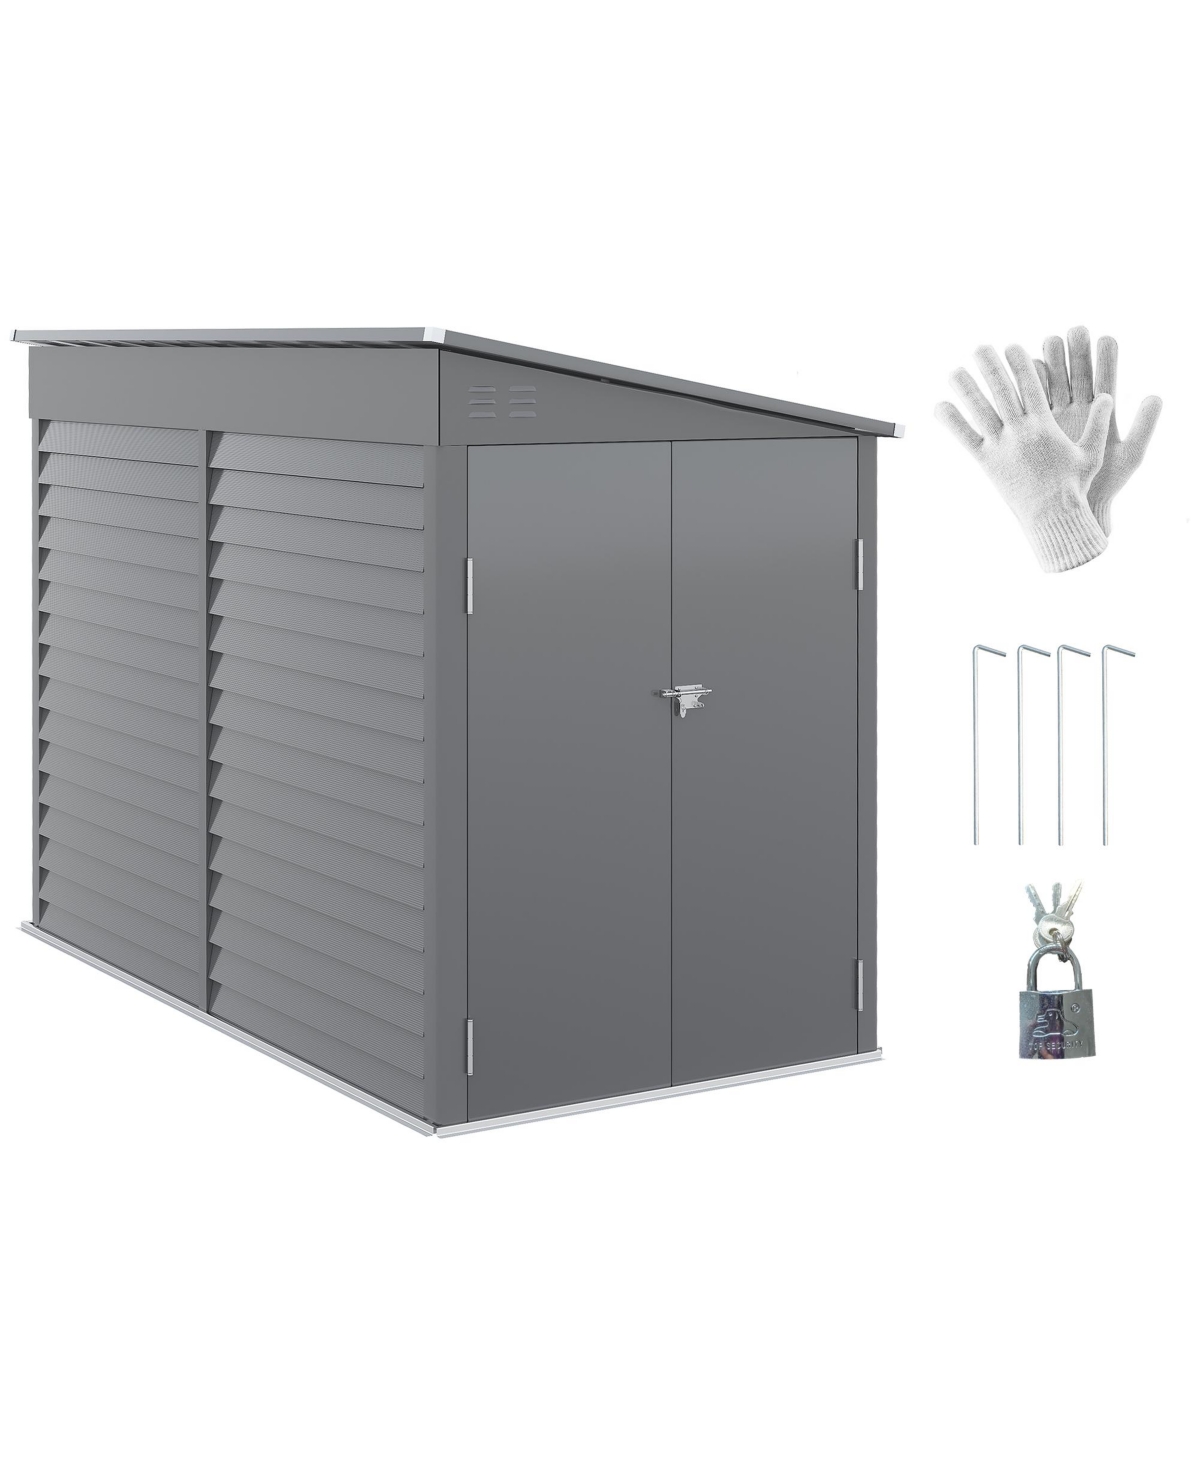 5' x 9' Steel Outdoor Storage Shed, Lean to Shed, Metal Tool House with Floor Foundation, Lockable Doors, Gloves and 2 Air Vents for Backyard